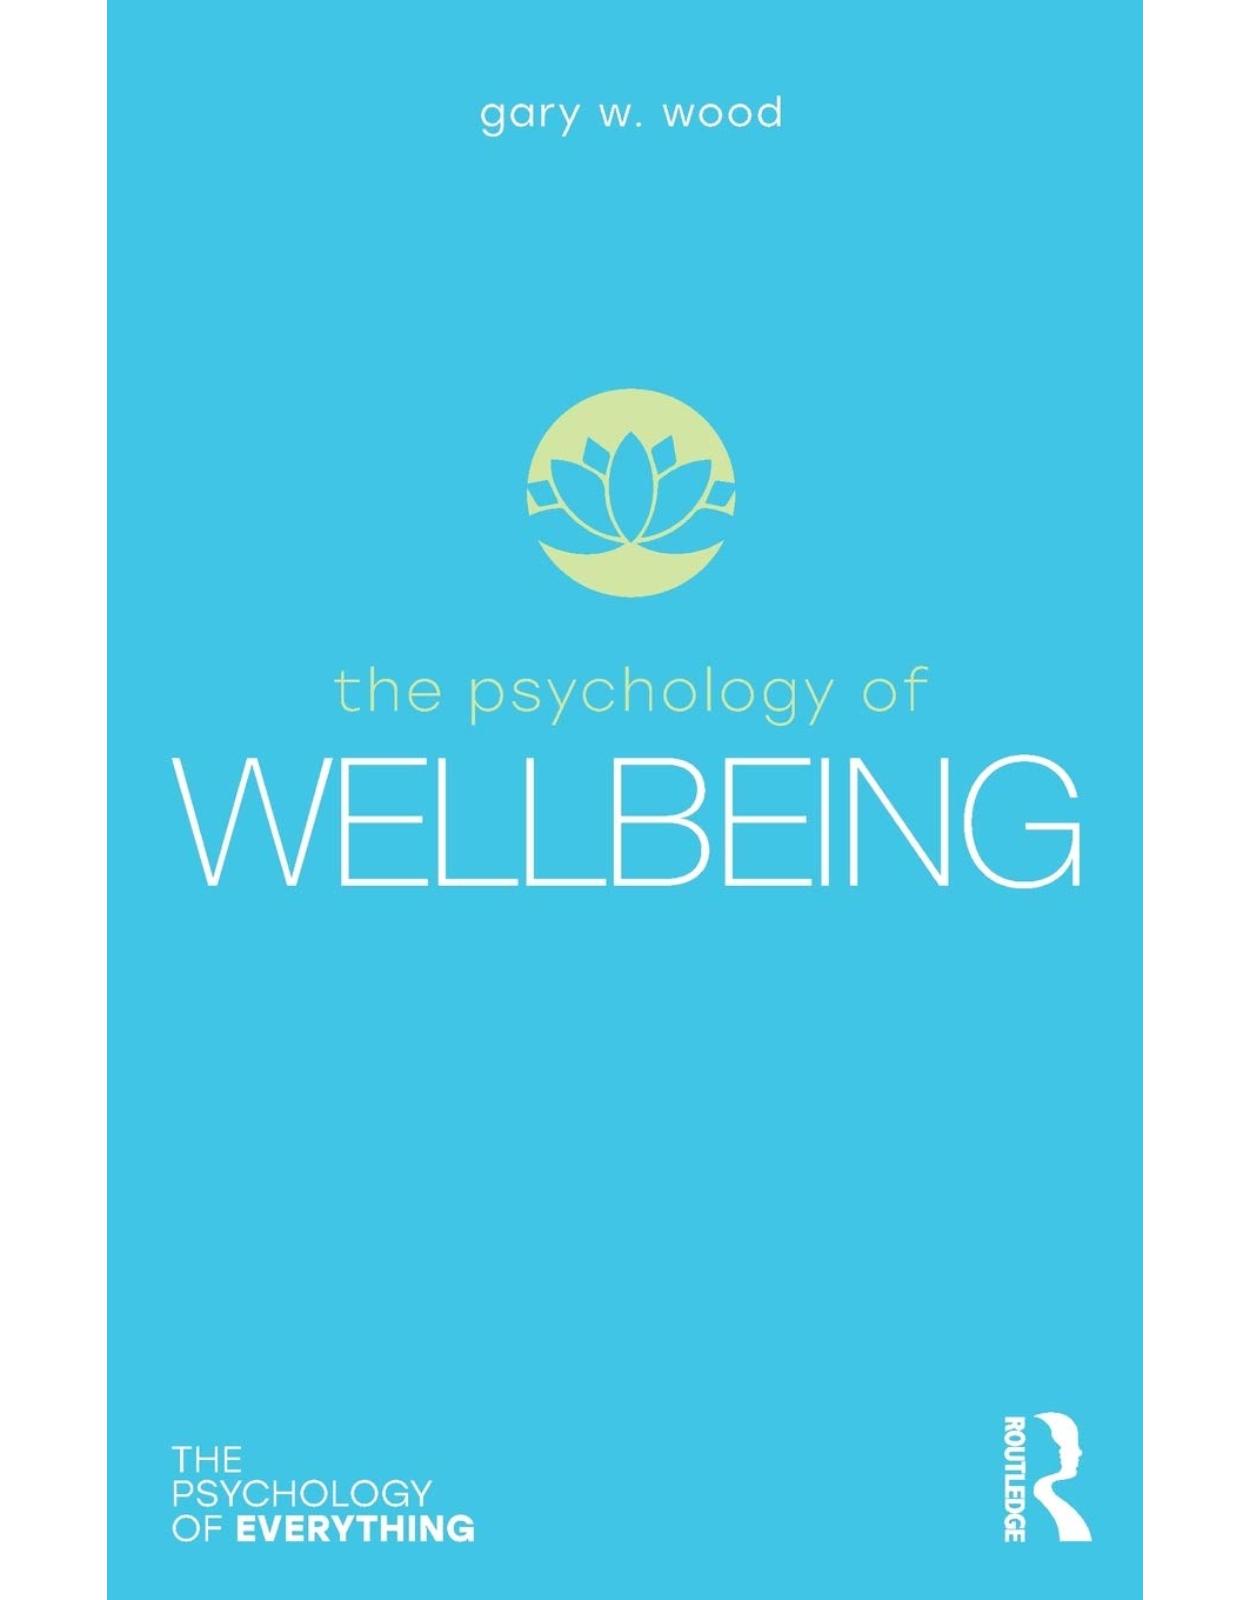 The Psychology of Wellbeing (The Psychology of Everything)